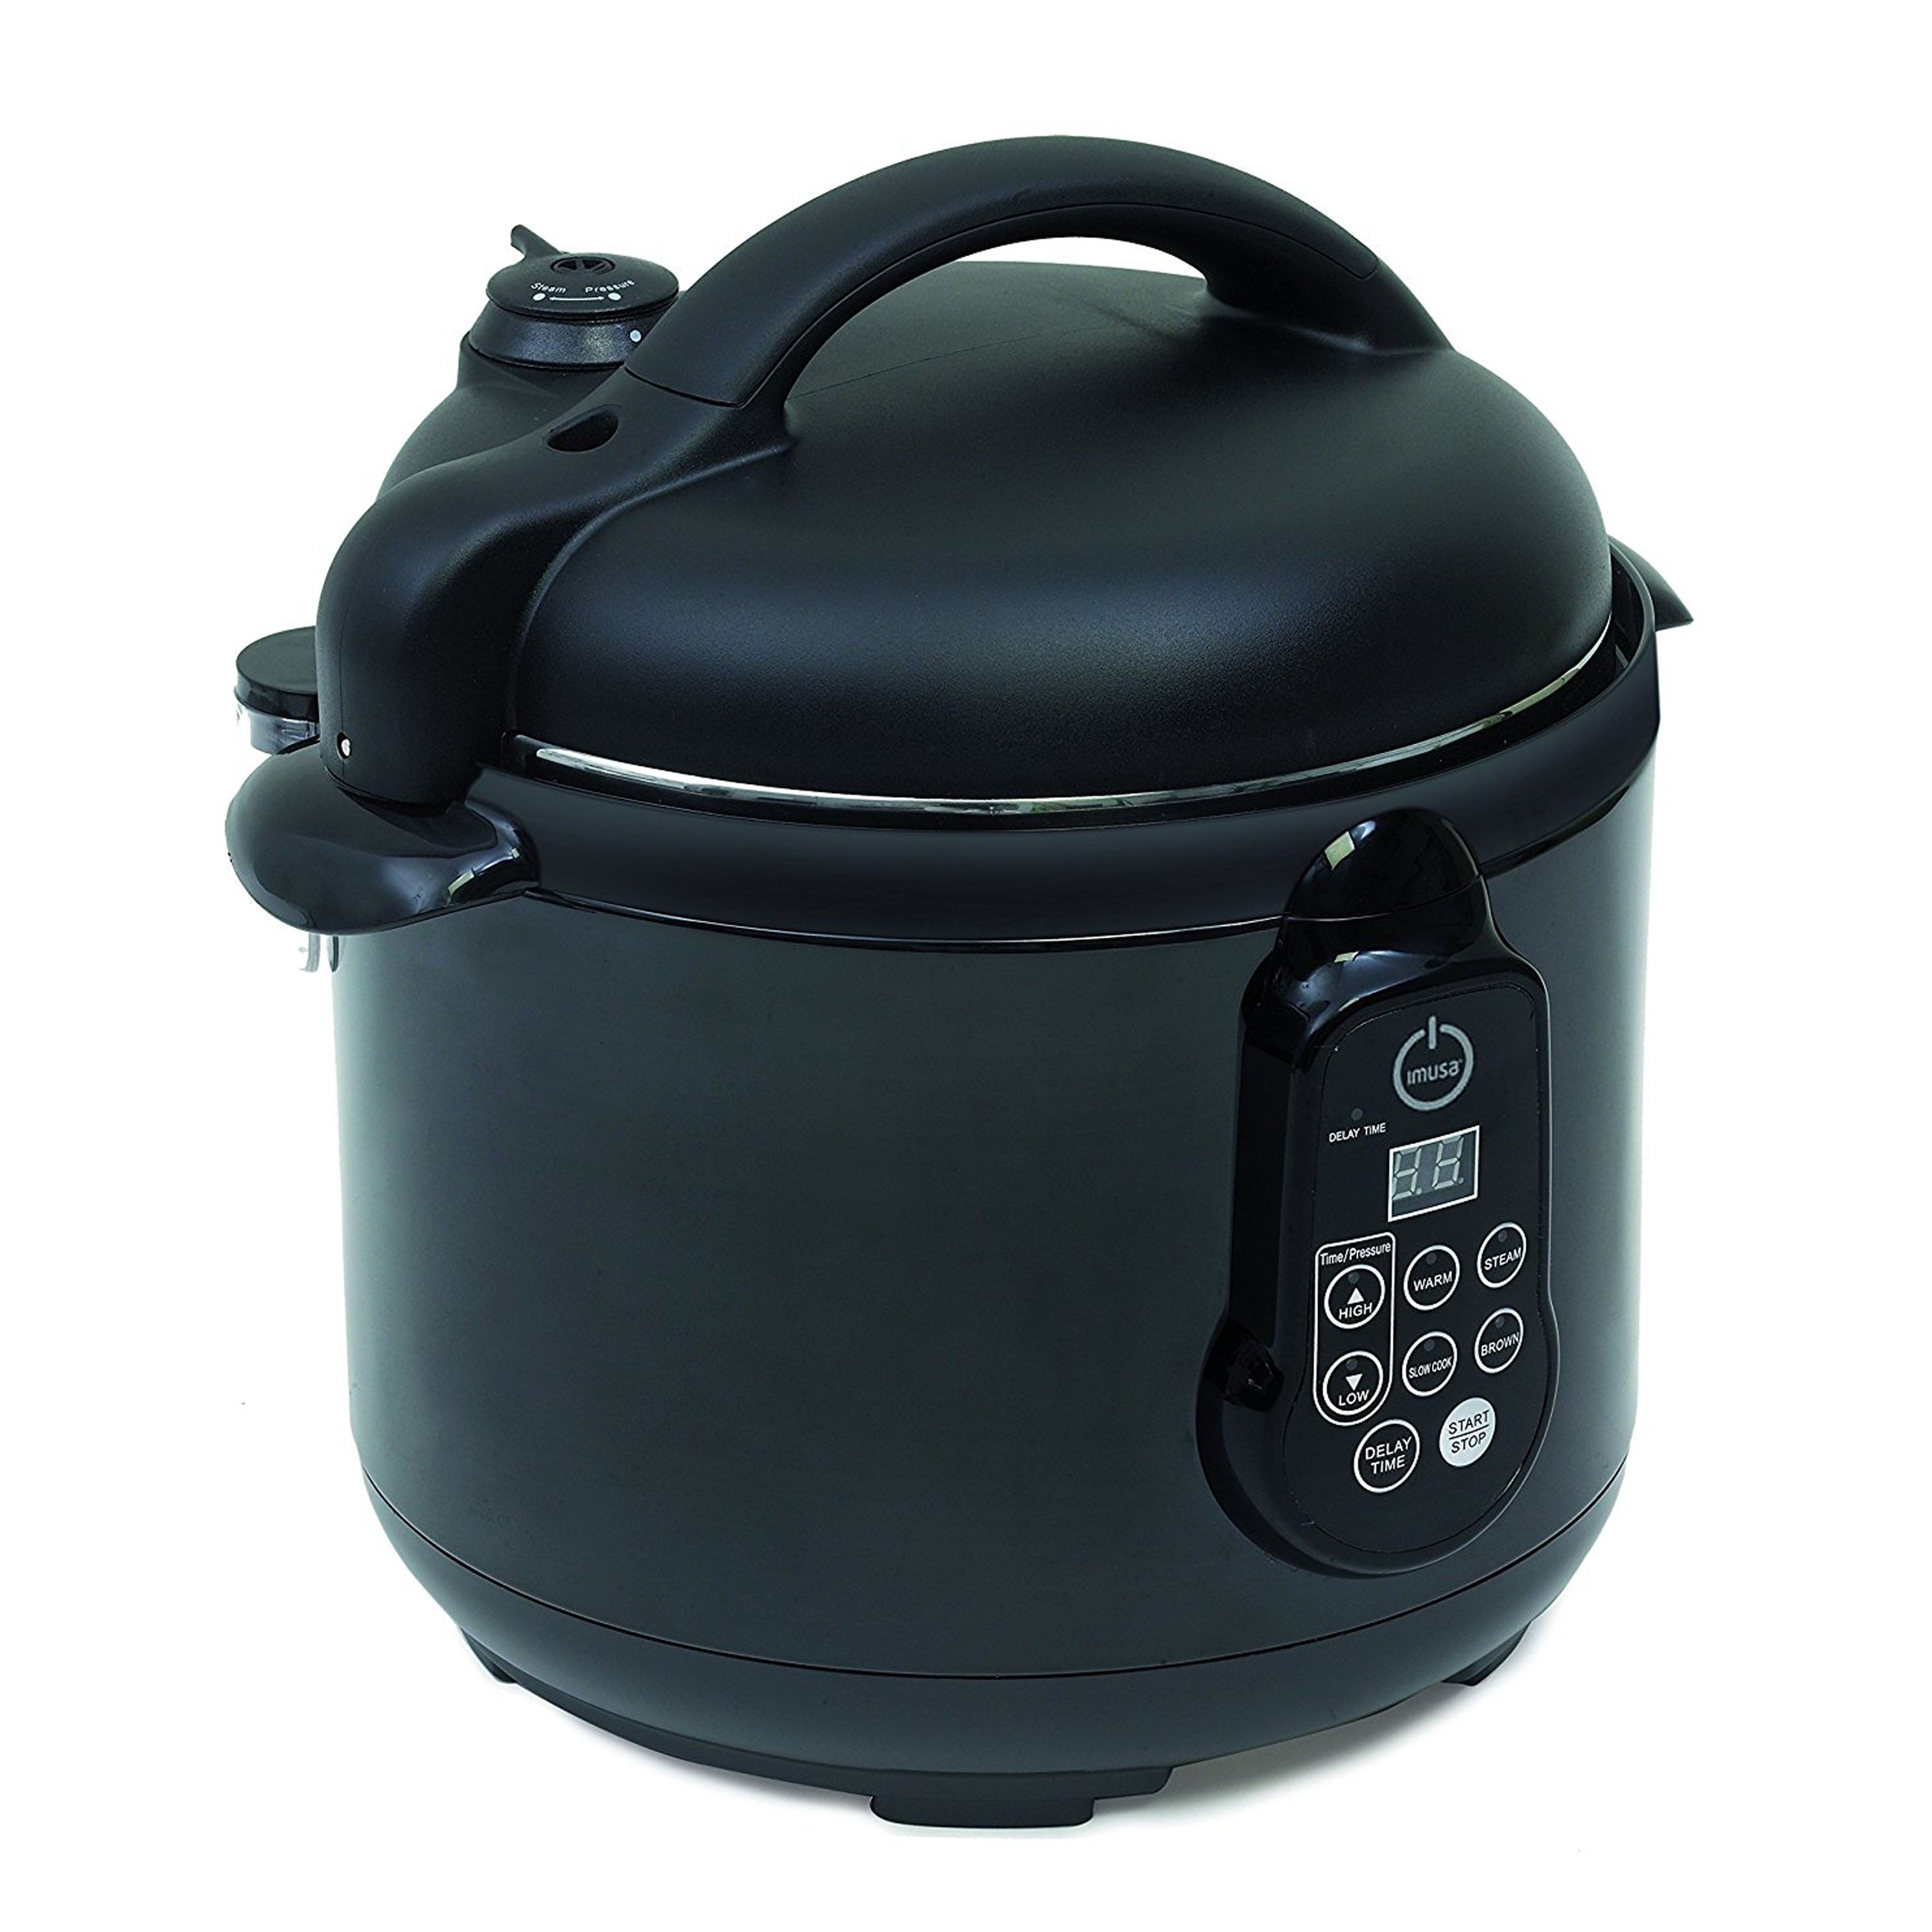 Black + Decker Pressure Cooker Review, Price and Features - Pros